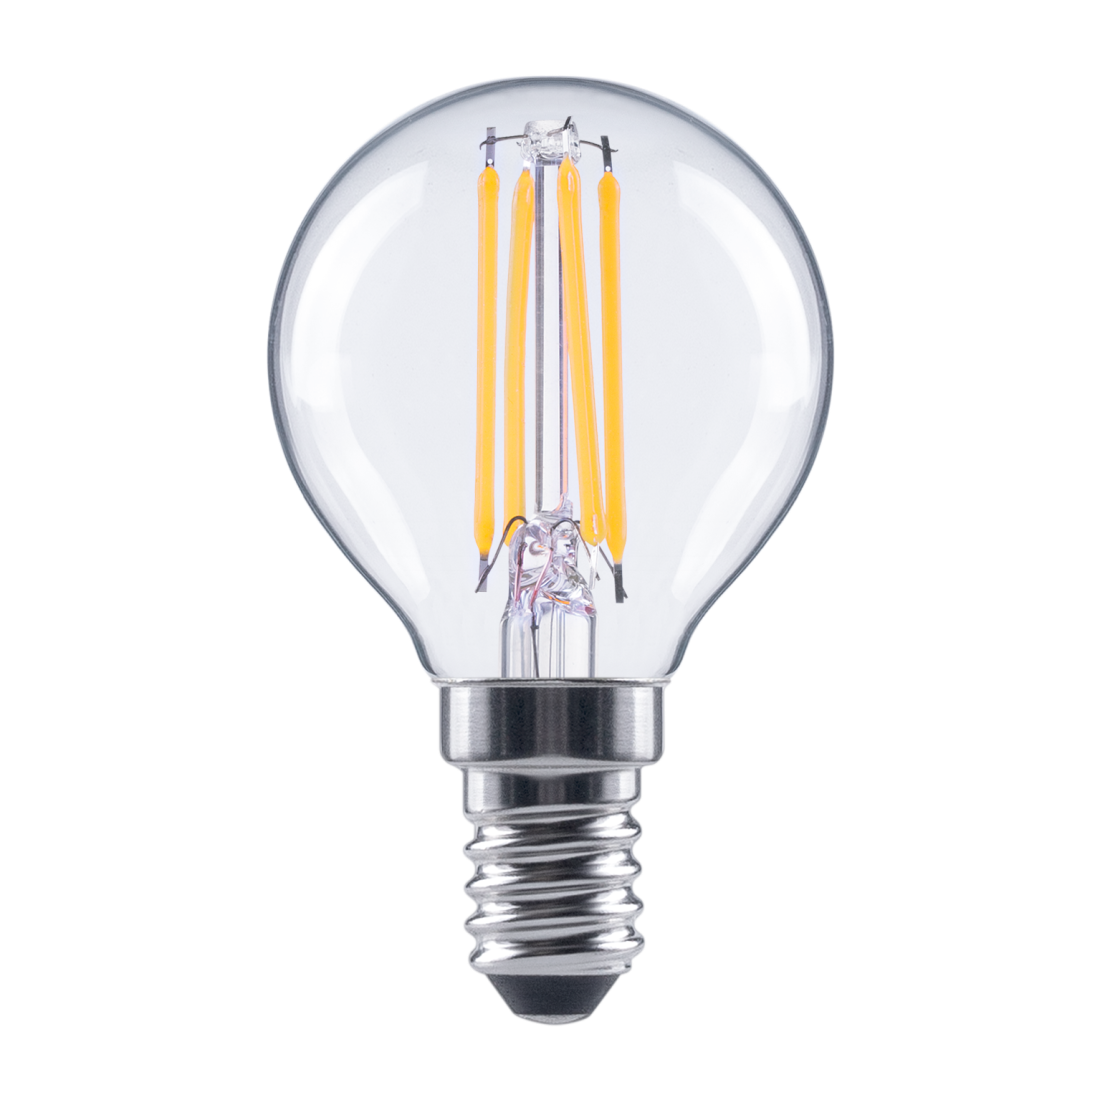 abx High-Res Image - Xavax, LED Filament, E14, 470 lm Replaces 40 W, Drop Bulb, warm white